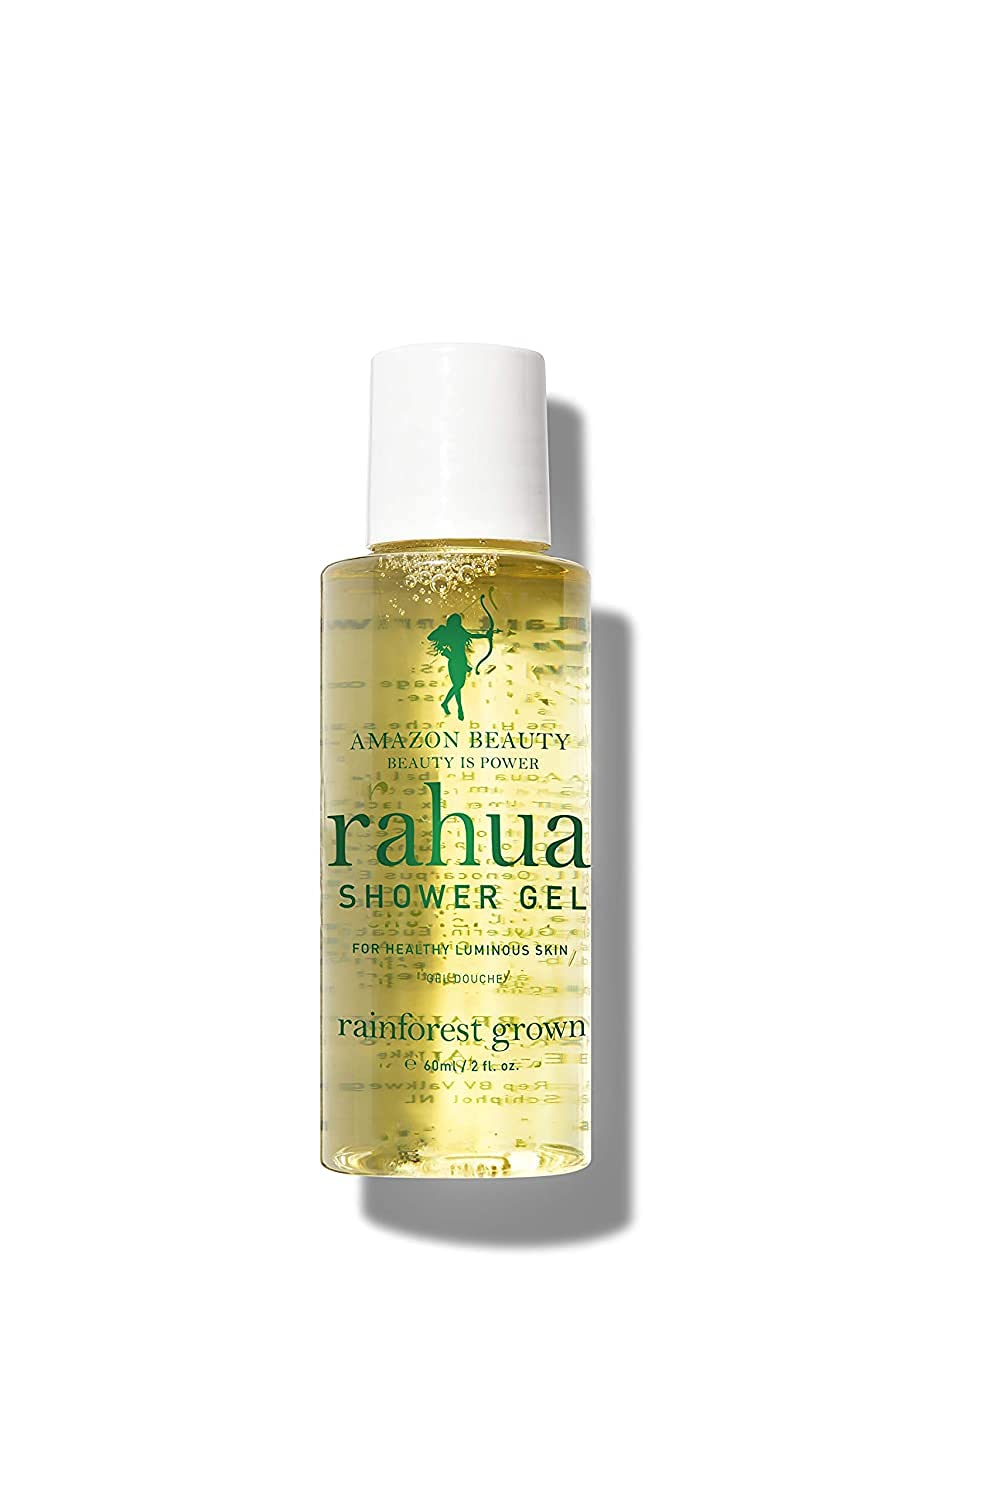 Rahua Shower Gel, 2 Fl Oz, Healthy Skin Body Shower Gel Made With Natural Plant Based Organic Ingredients, Shower Gel Nourishes and Restores Skin's Moisture Balance, Best for All Skin Types - Travel Size, TSA-Approved